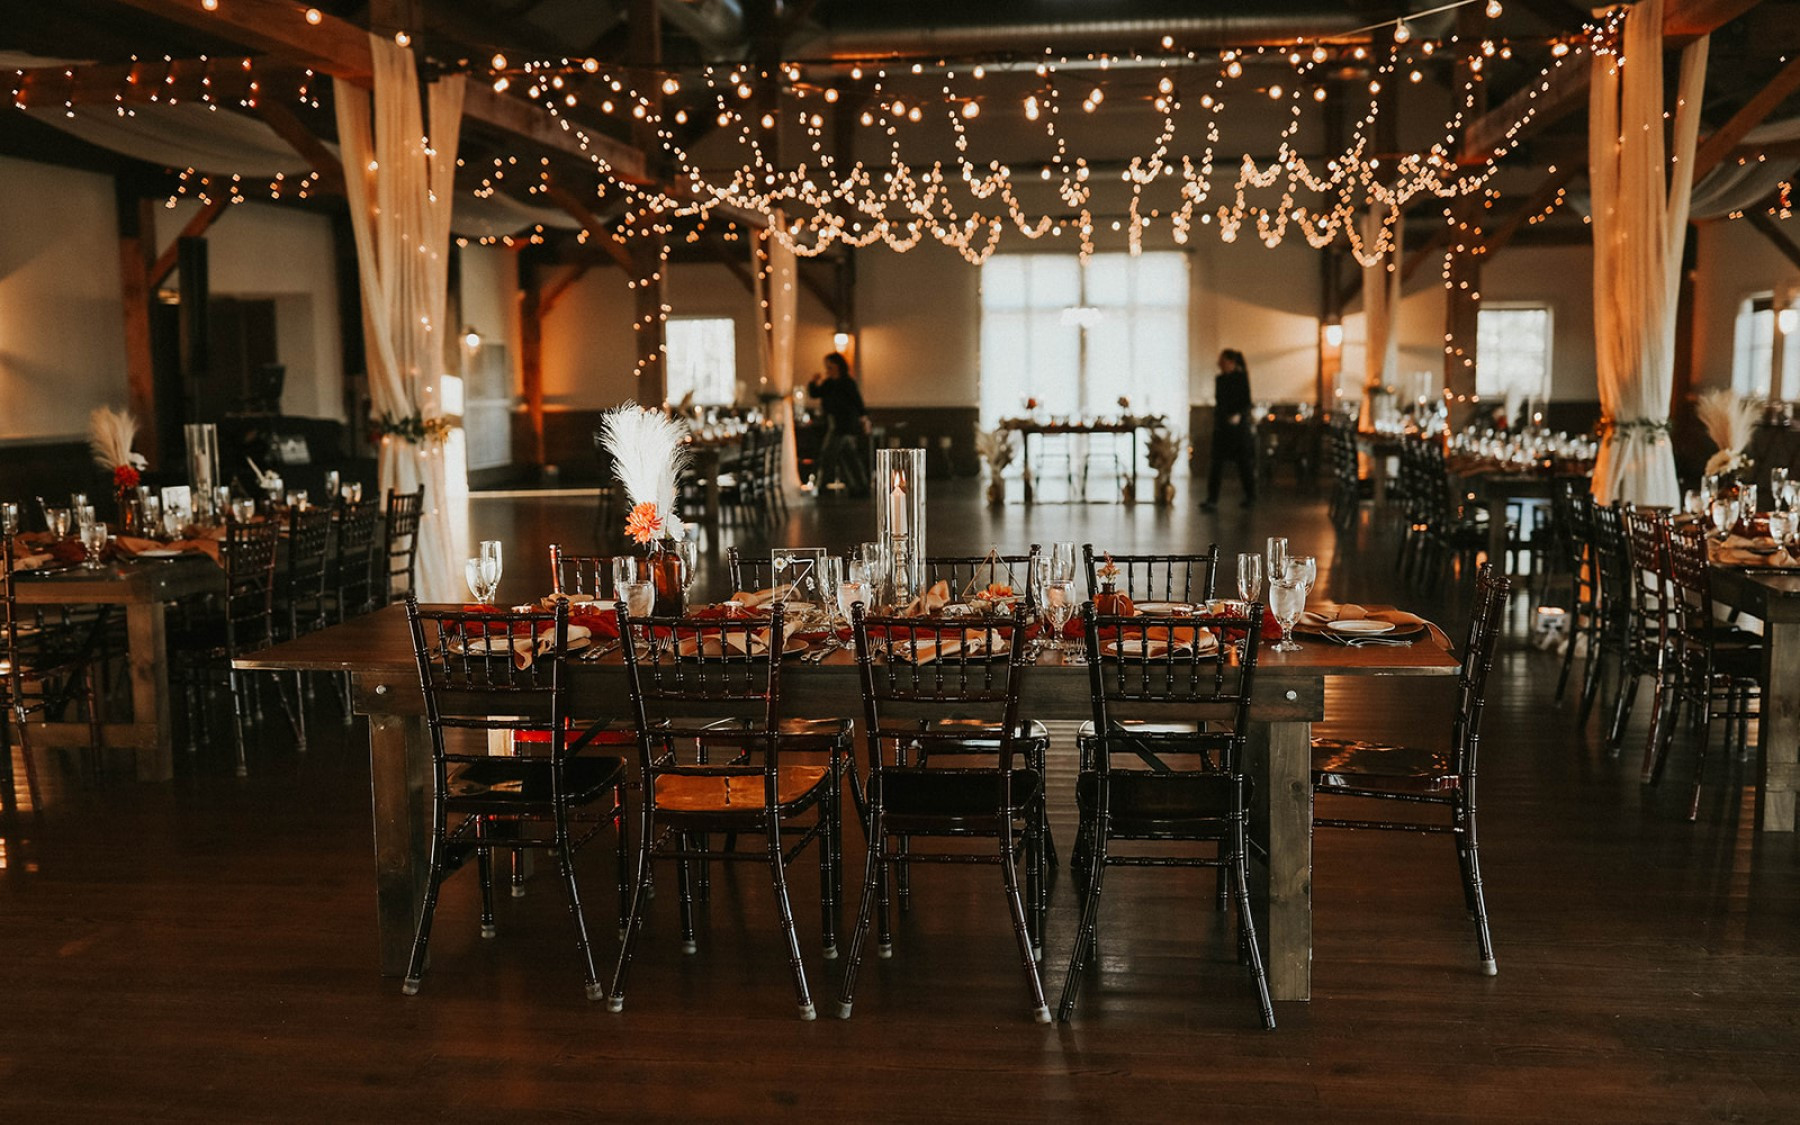 event barn setup with farmhouse tables, chairs, and string lighting towards the ceiling with drapery.